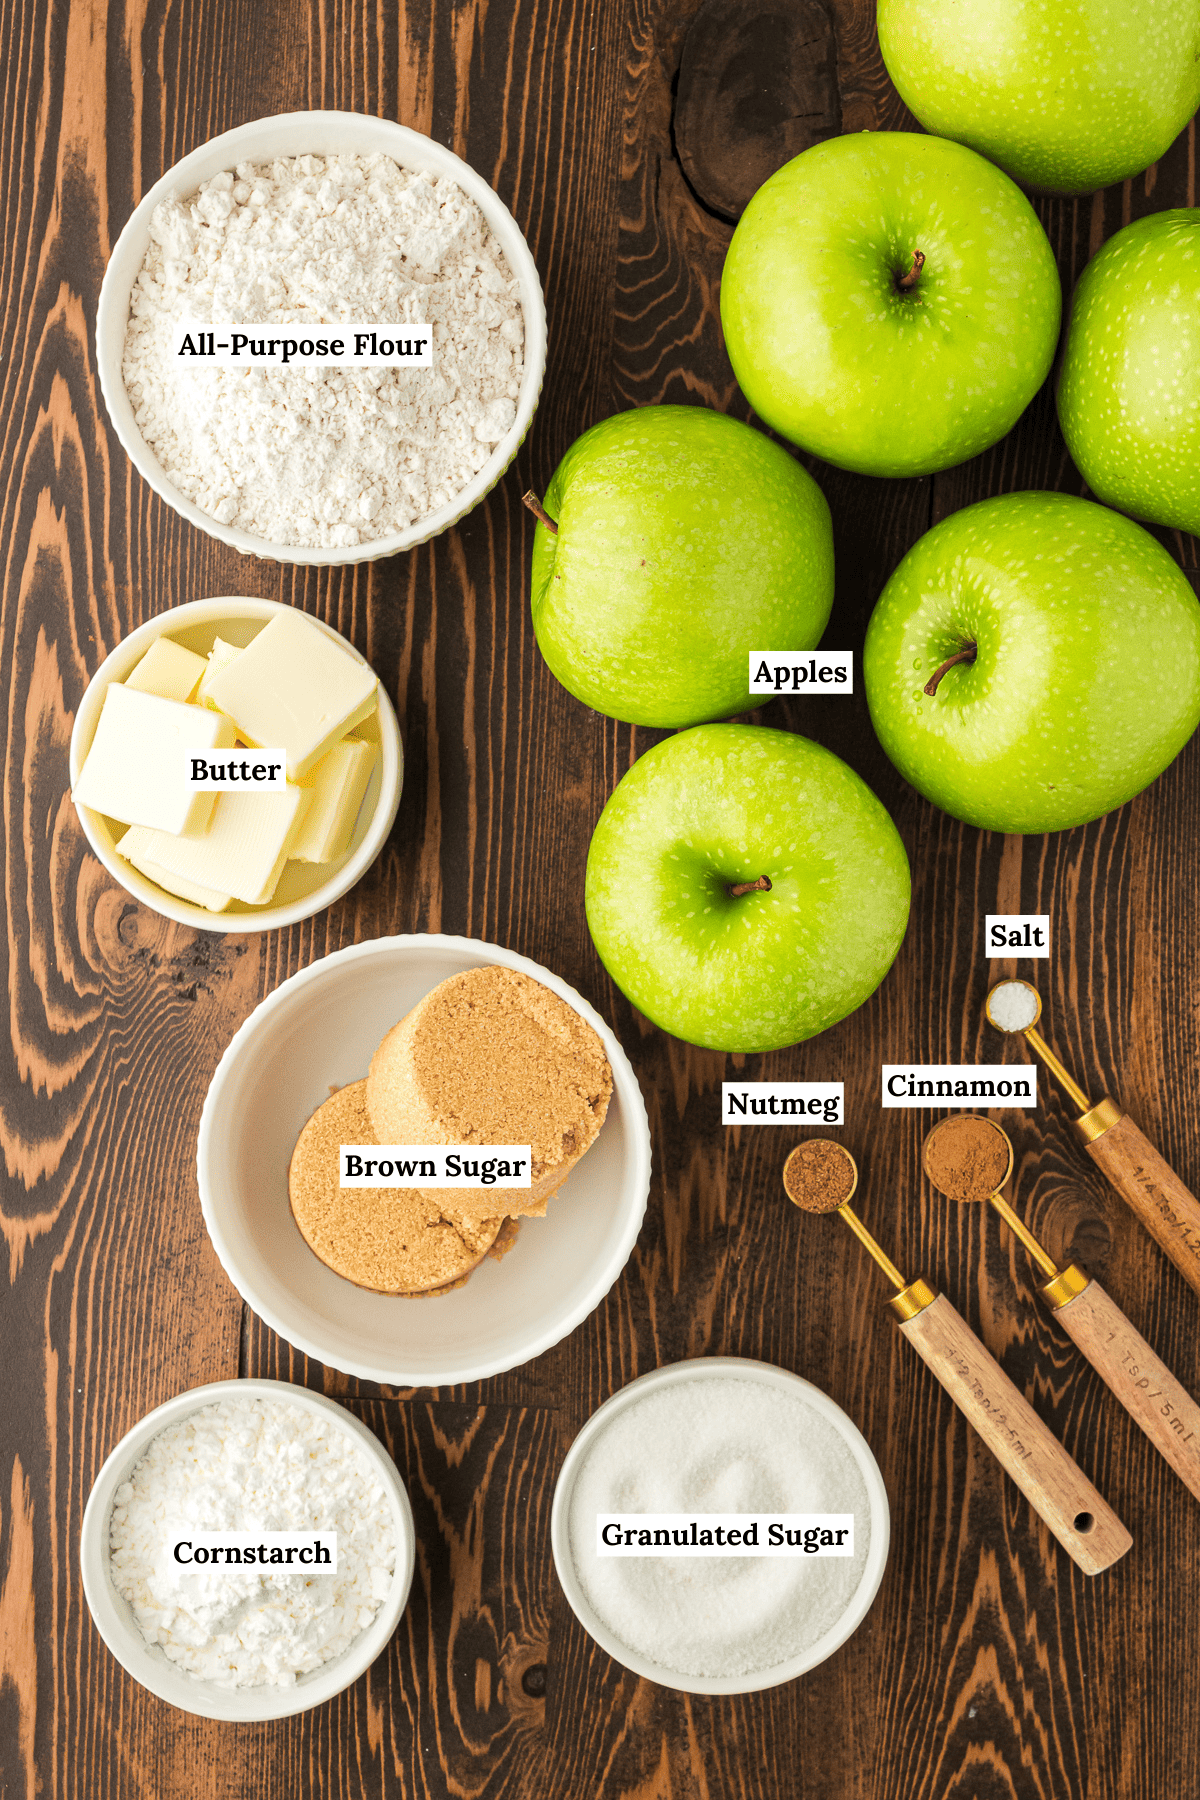 ingredients for apple crumble arranged around each other on a wooden surface including green apples, all-purpose flour, butter, brown sugar, salt, cinnamon, nutmeg, granulated sugar, and cornstarch